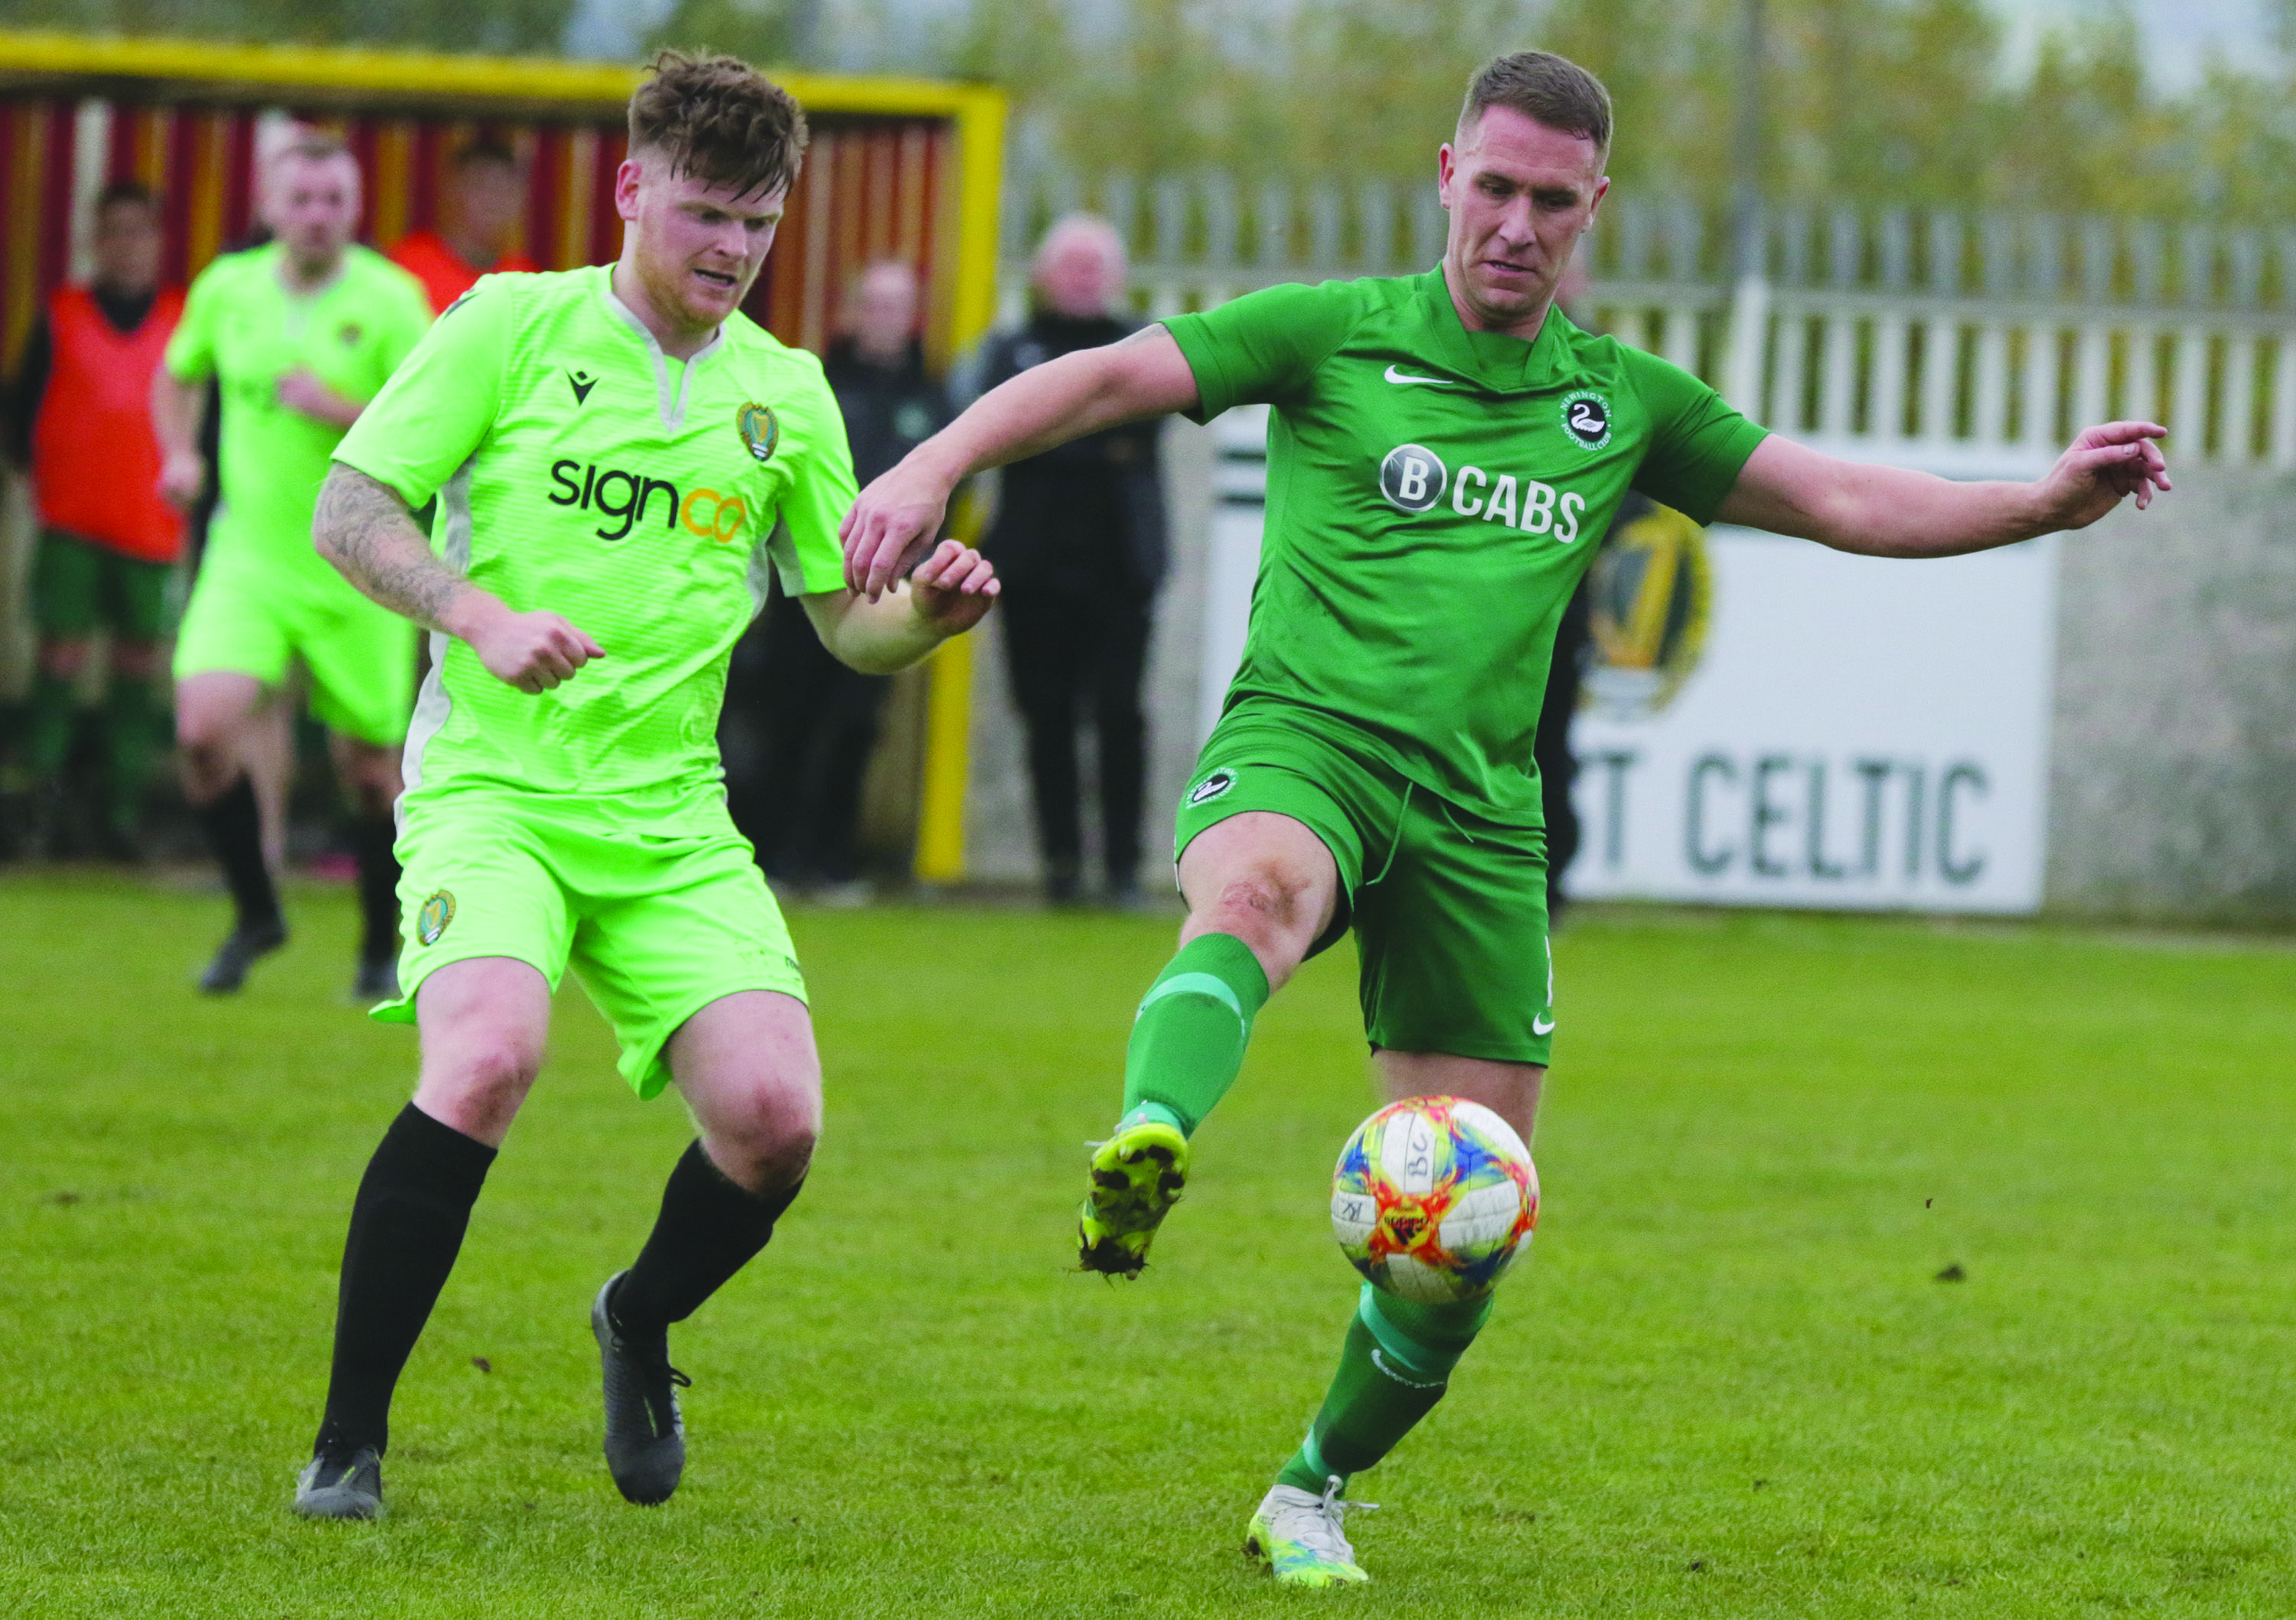 Newington accounted for Belfast Celtic in the quarter-final